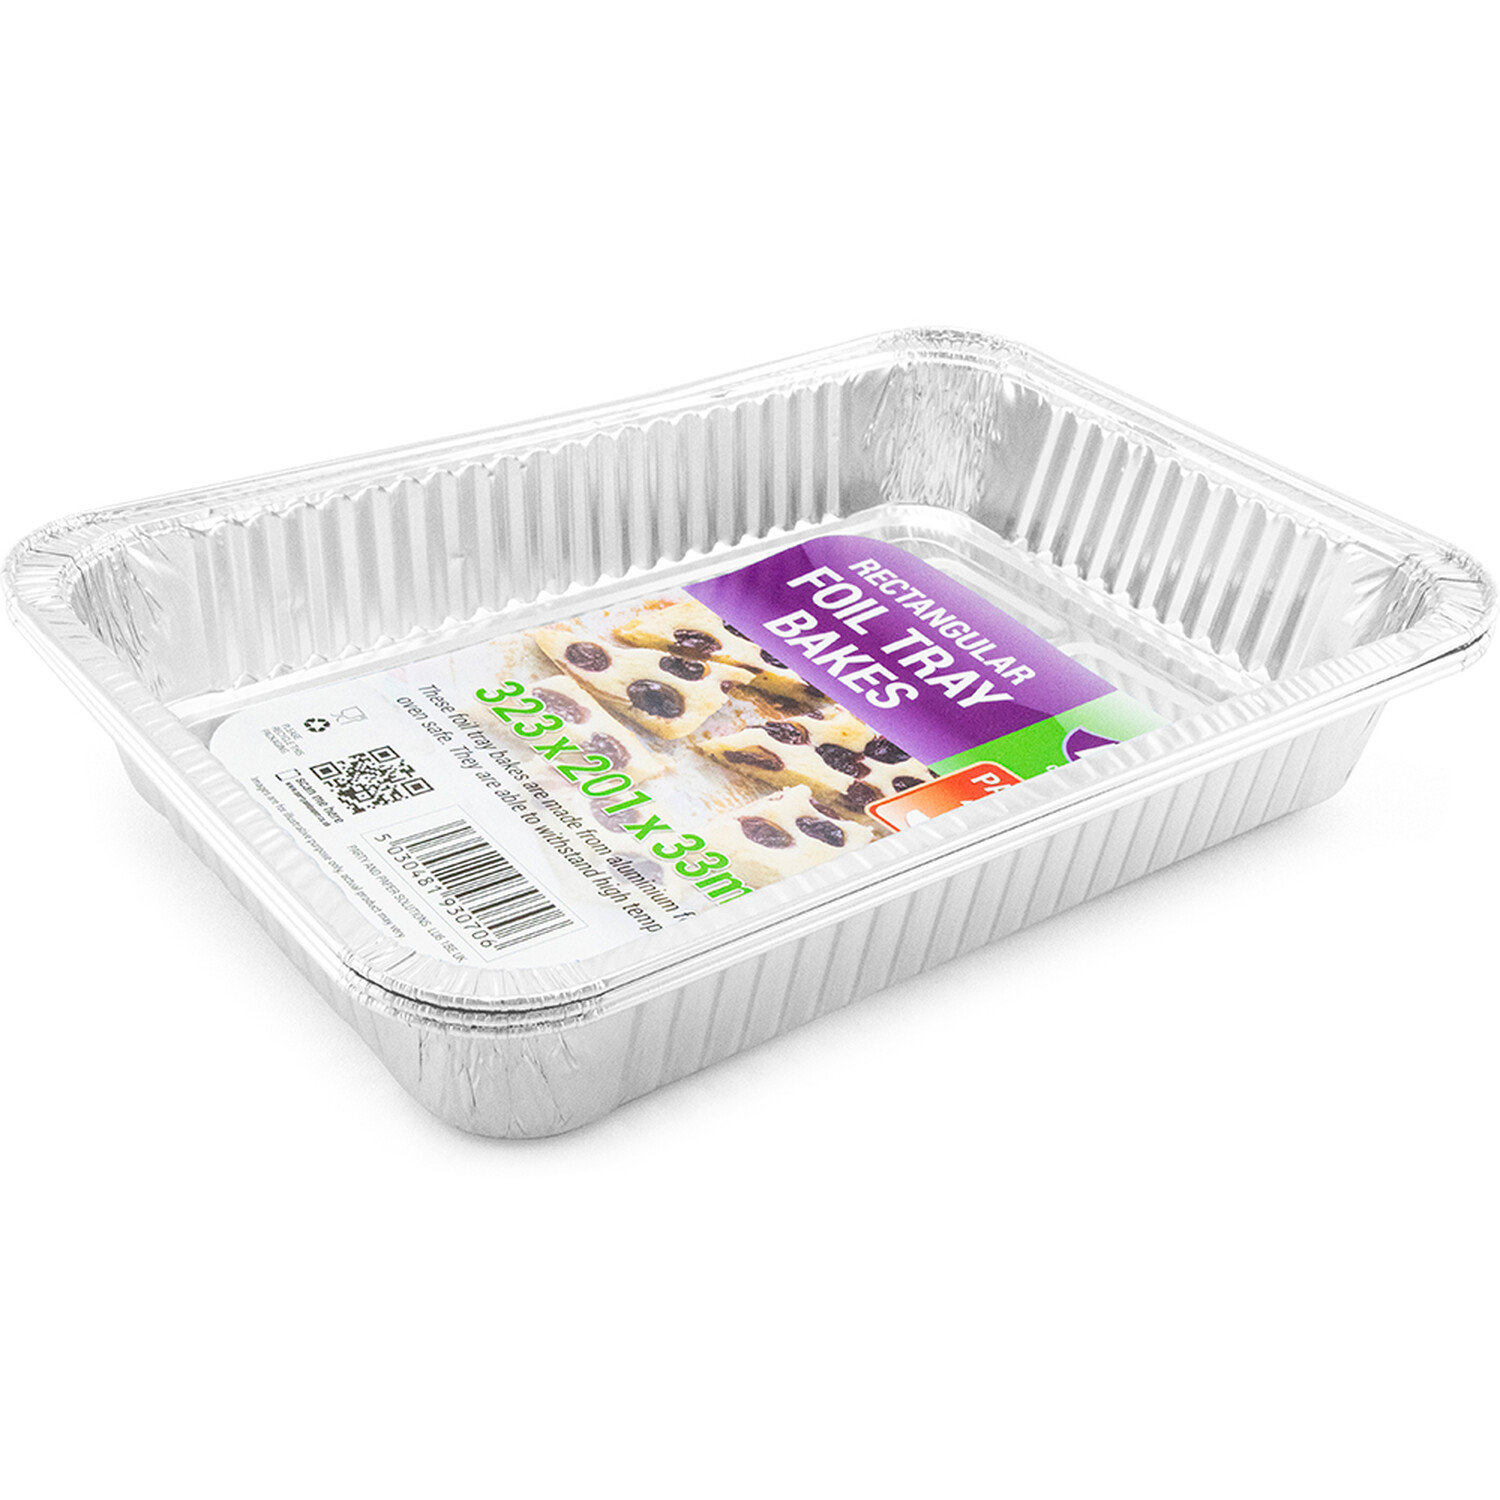 Silver Foil Bake Trays 3 Pack Image 1